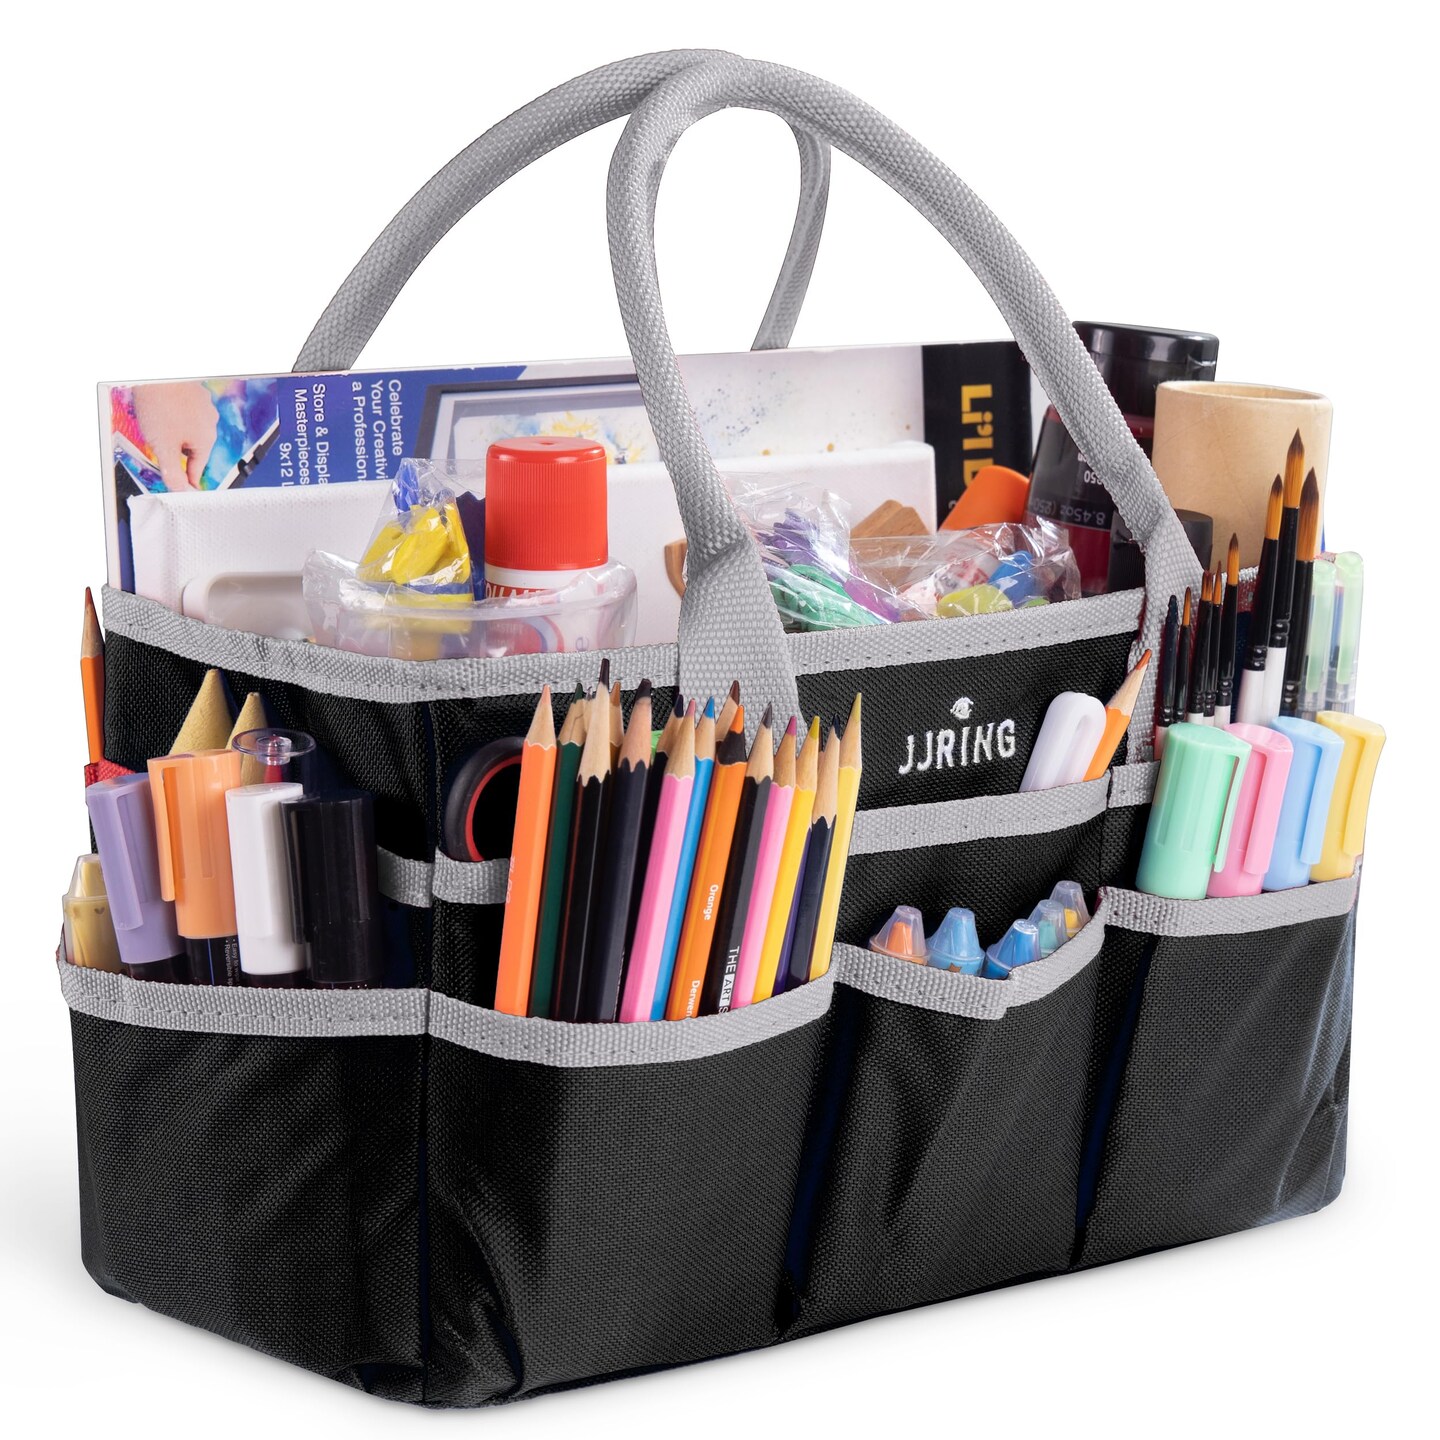 JJRING Craft and Art Organizer Tote Bag - 600D Silver Nylon Fabric Art Caddy with Pockets - for Art, Craft, Sewing, Medical, and Office Supplies Storage